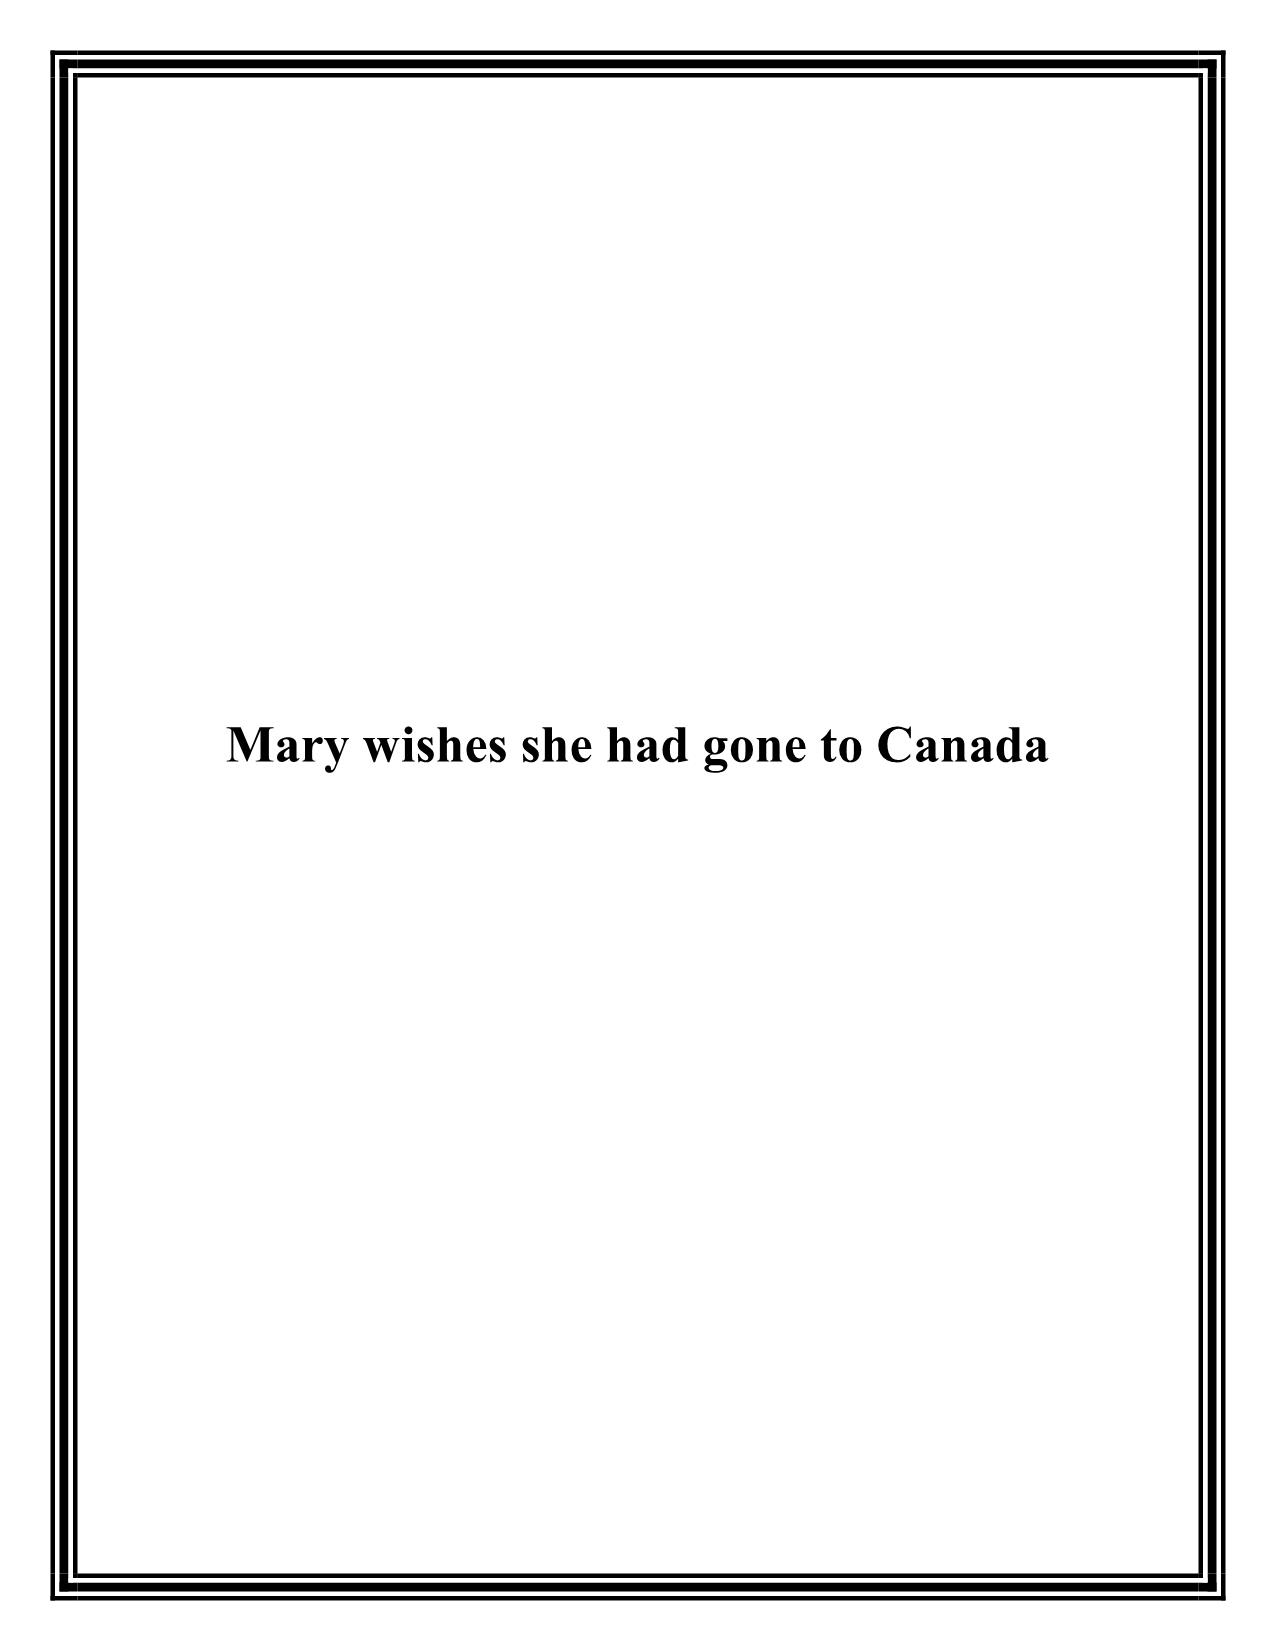 Mary wishes she had gone to Canada trang 1